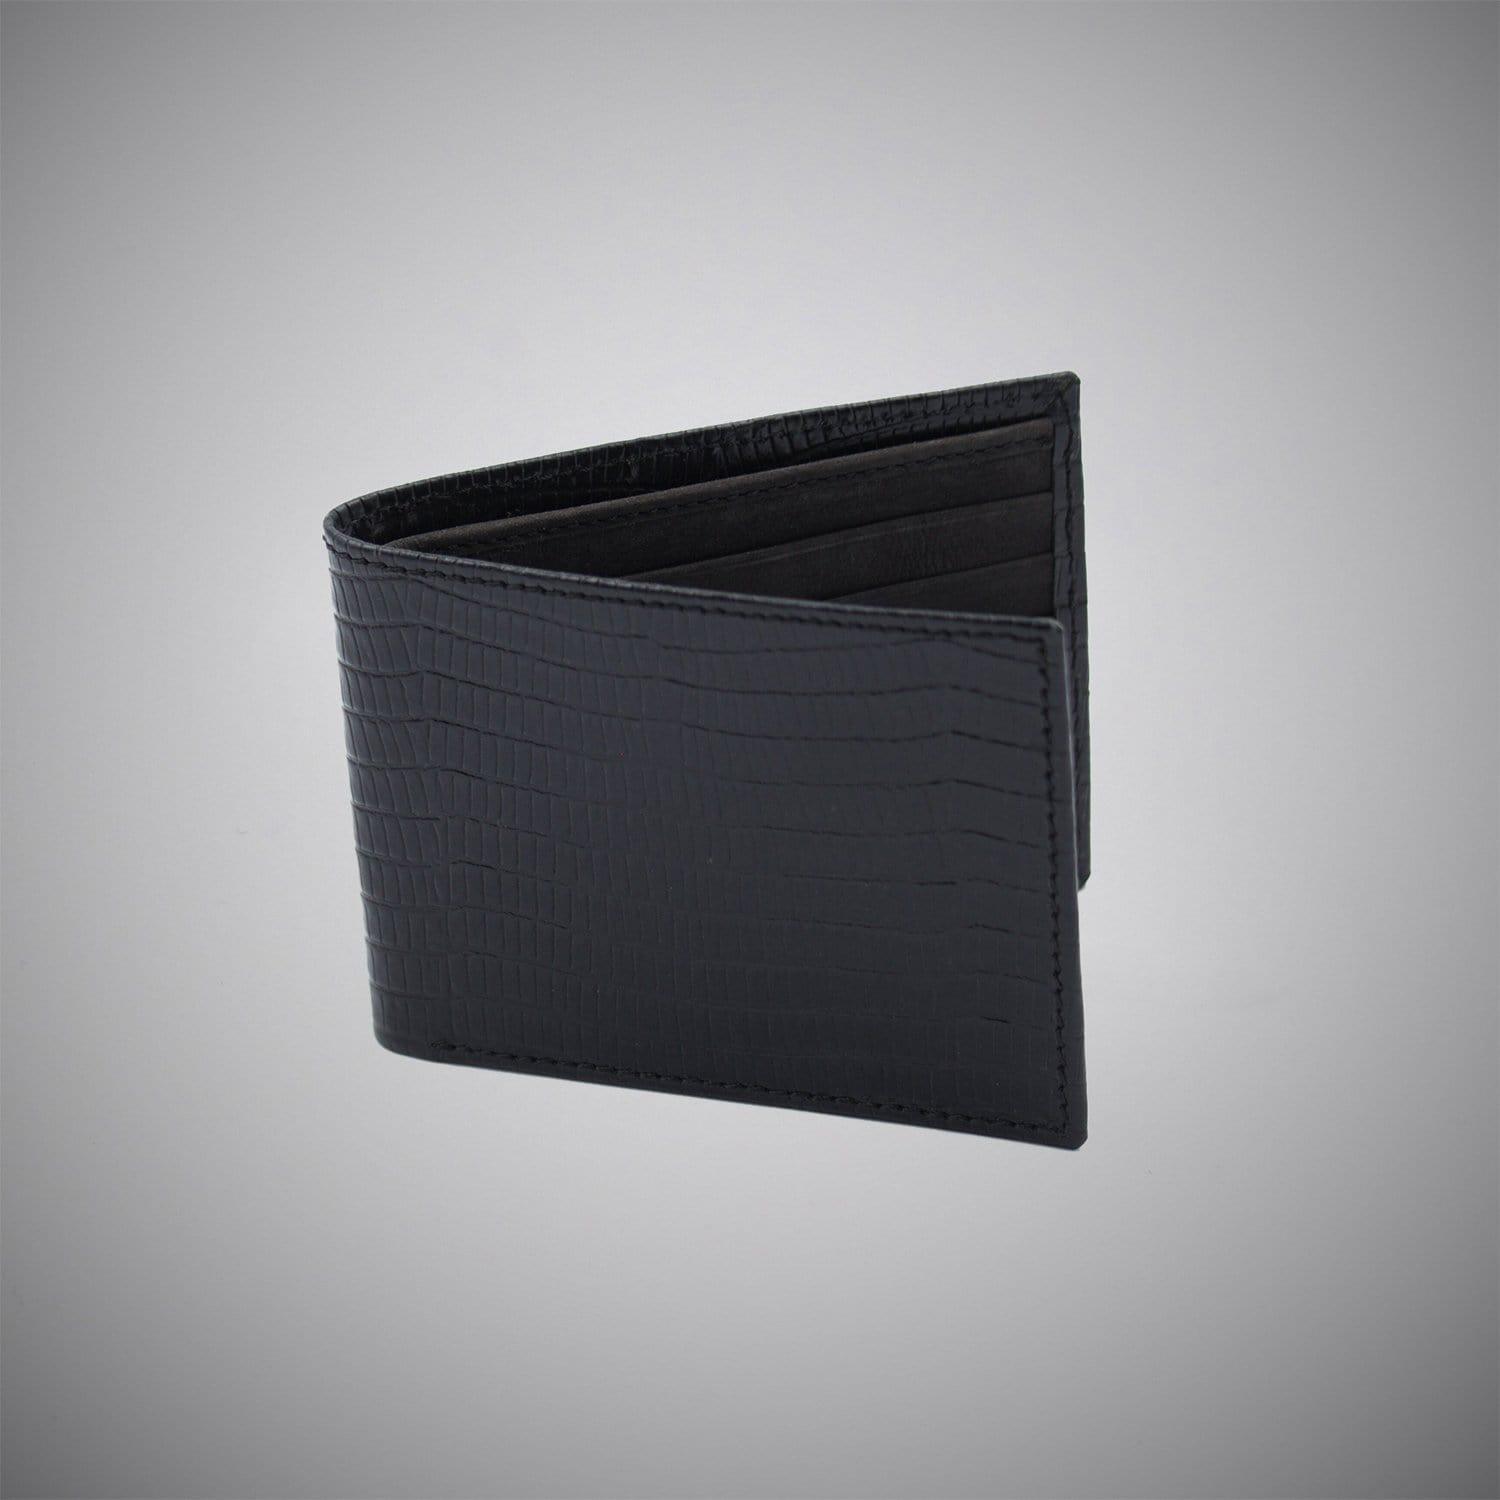 Black Lizard Skin Embossed Calf Leather Wallet With Black Suede Interior - Just White Shirts